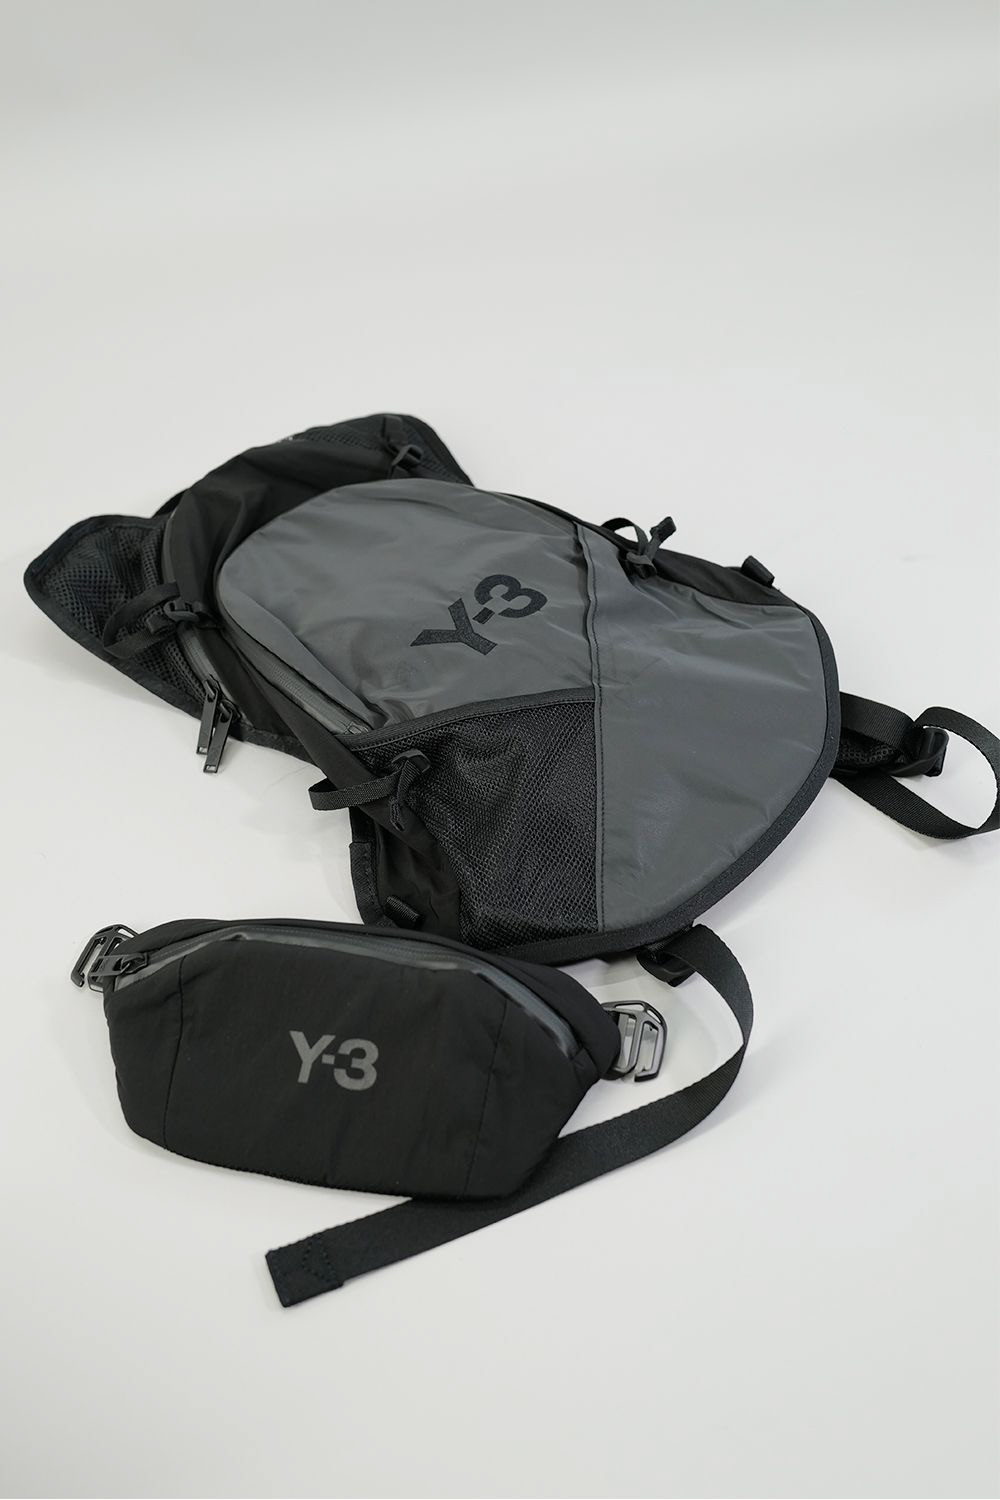 Y-3 CH1 REFLECTIVE BACKPACK on Behance